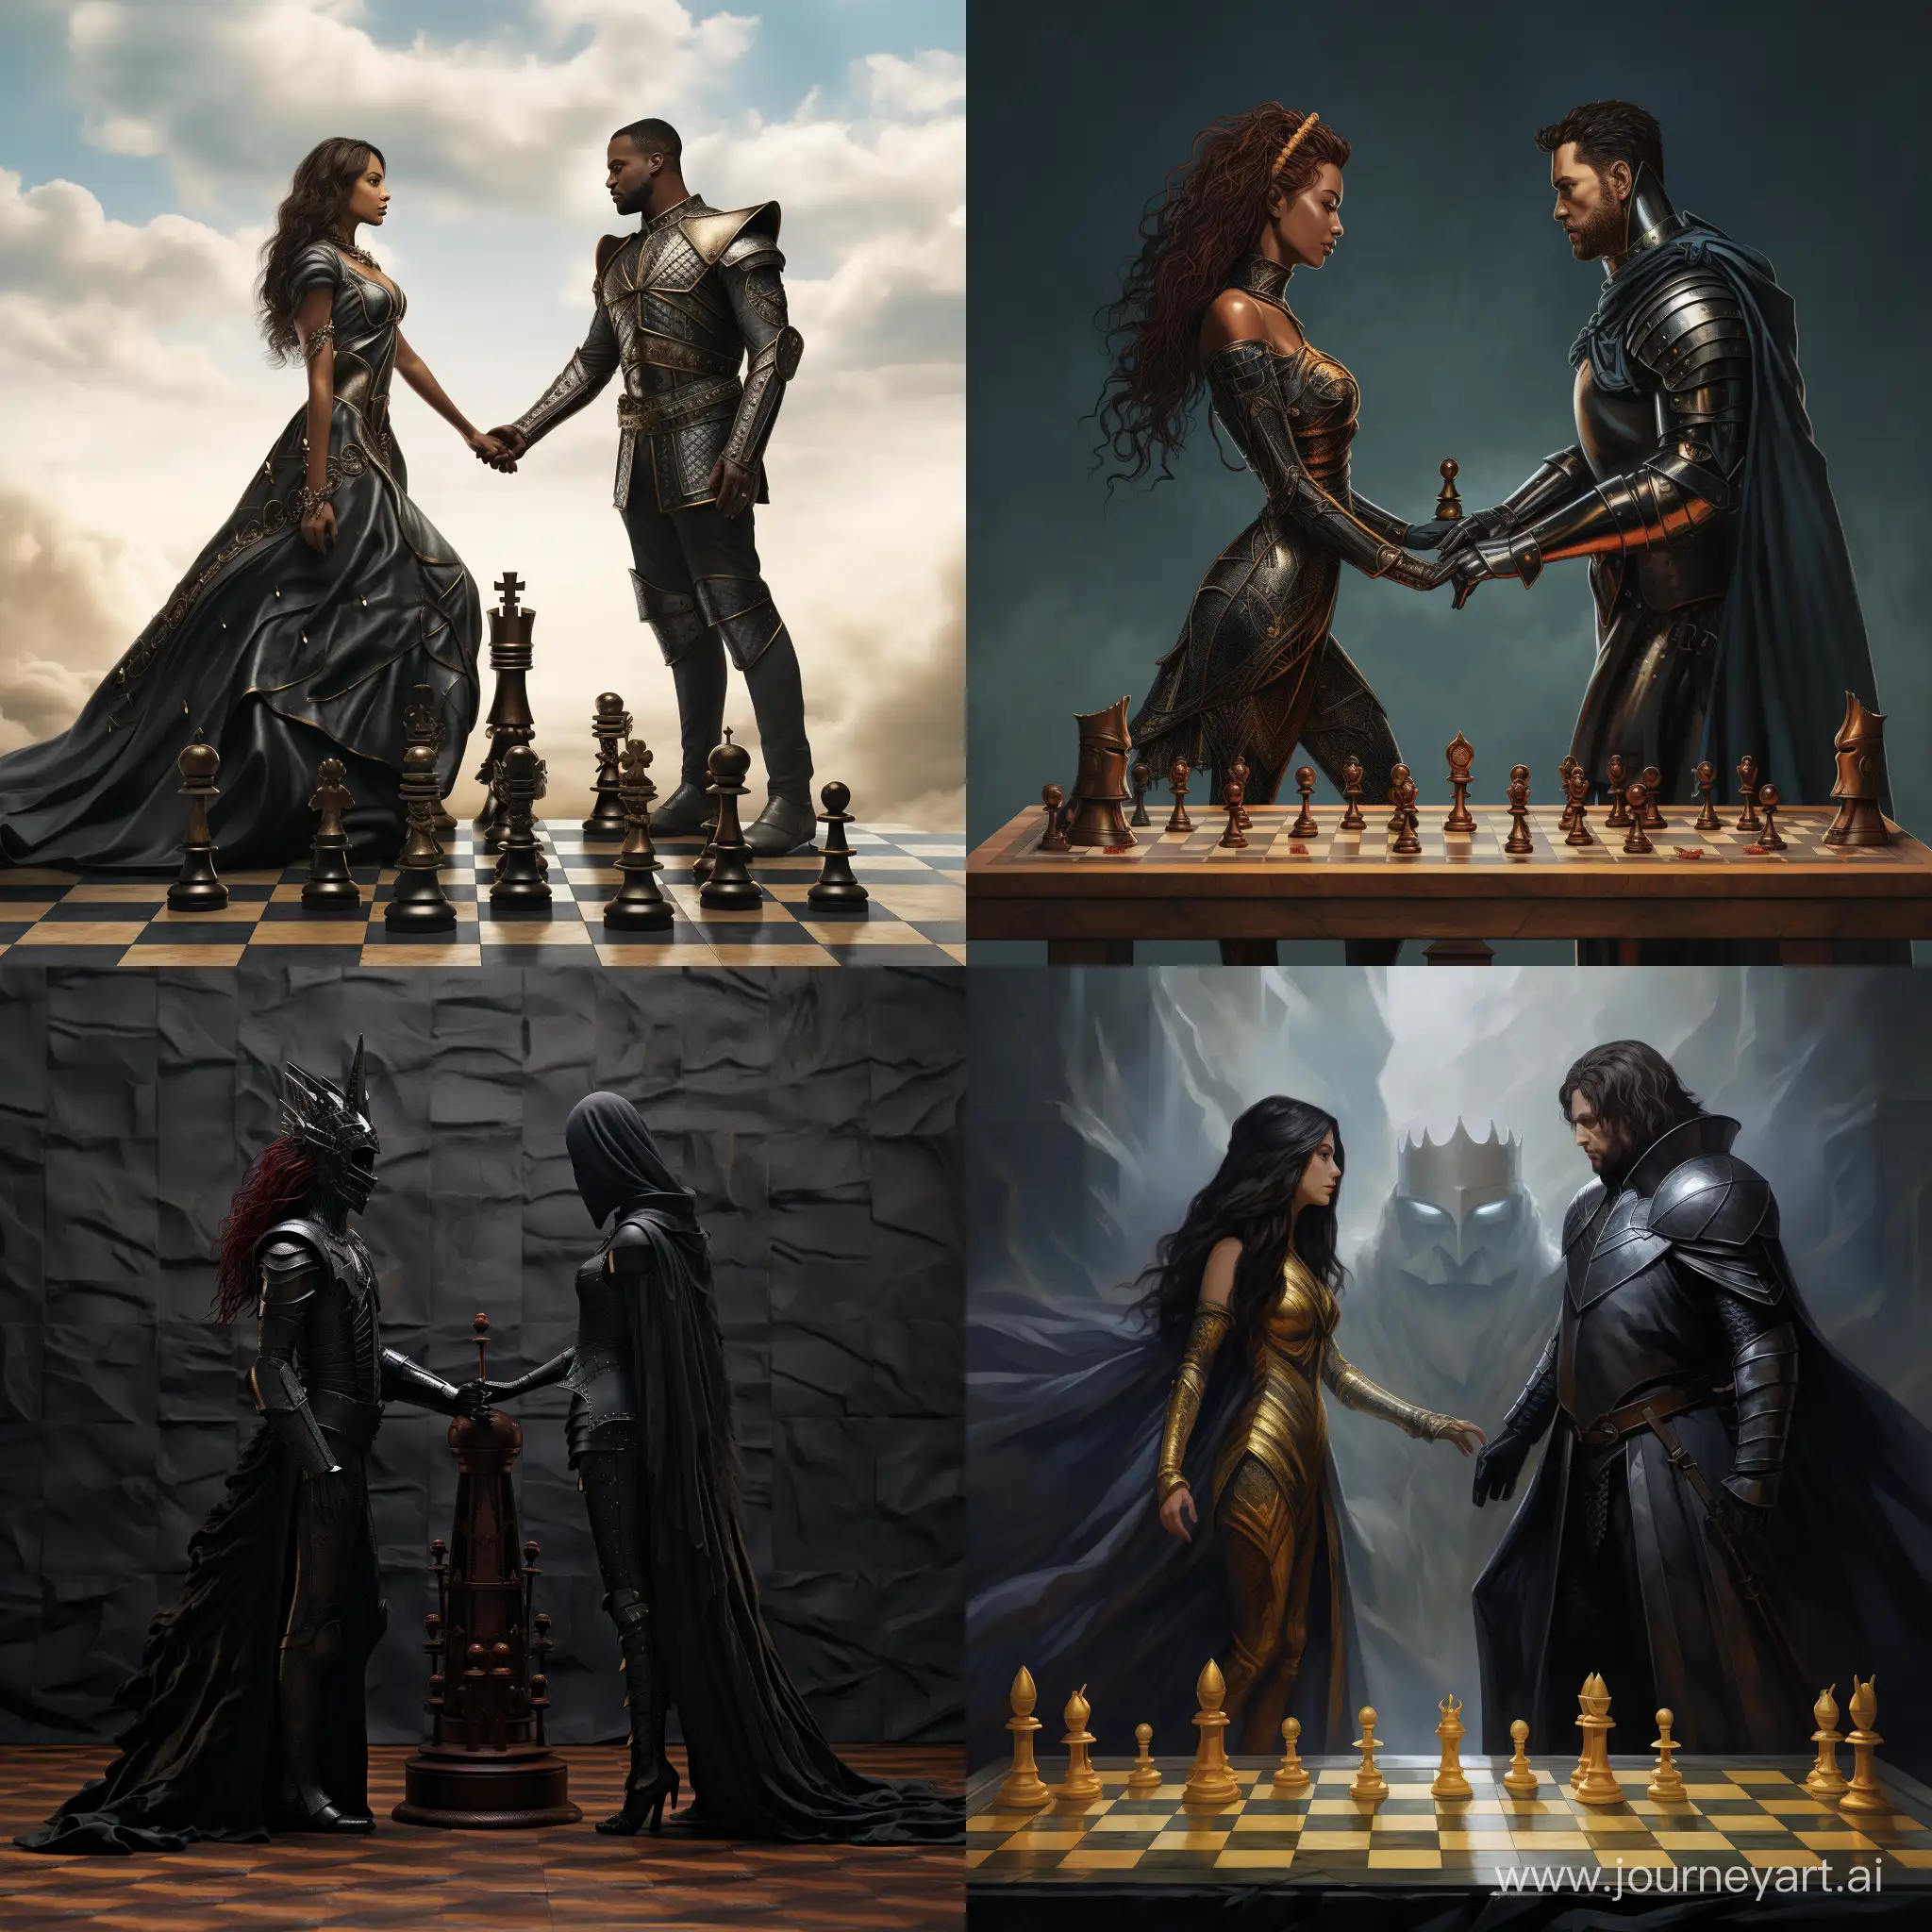 Strategic-Encounter-Black-Knight-and-Queen-Confrontation-on-Chess-Board